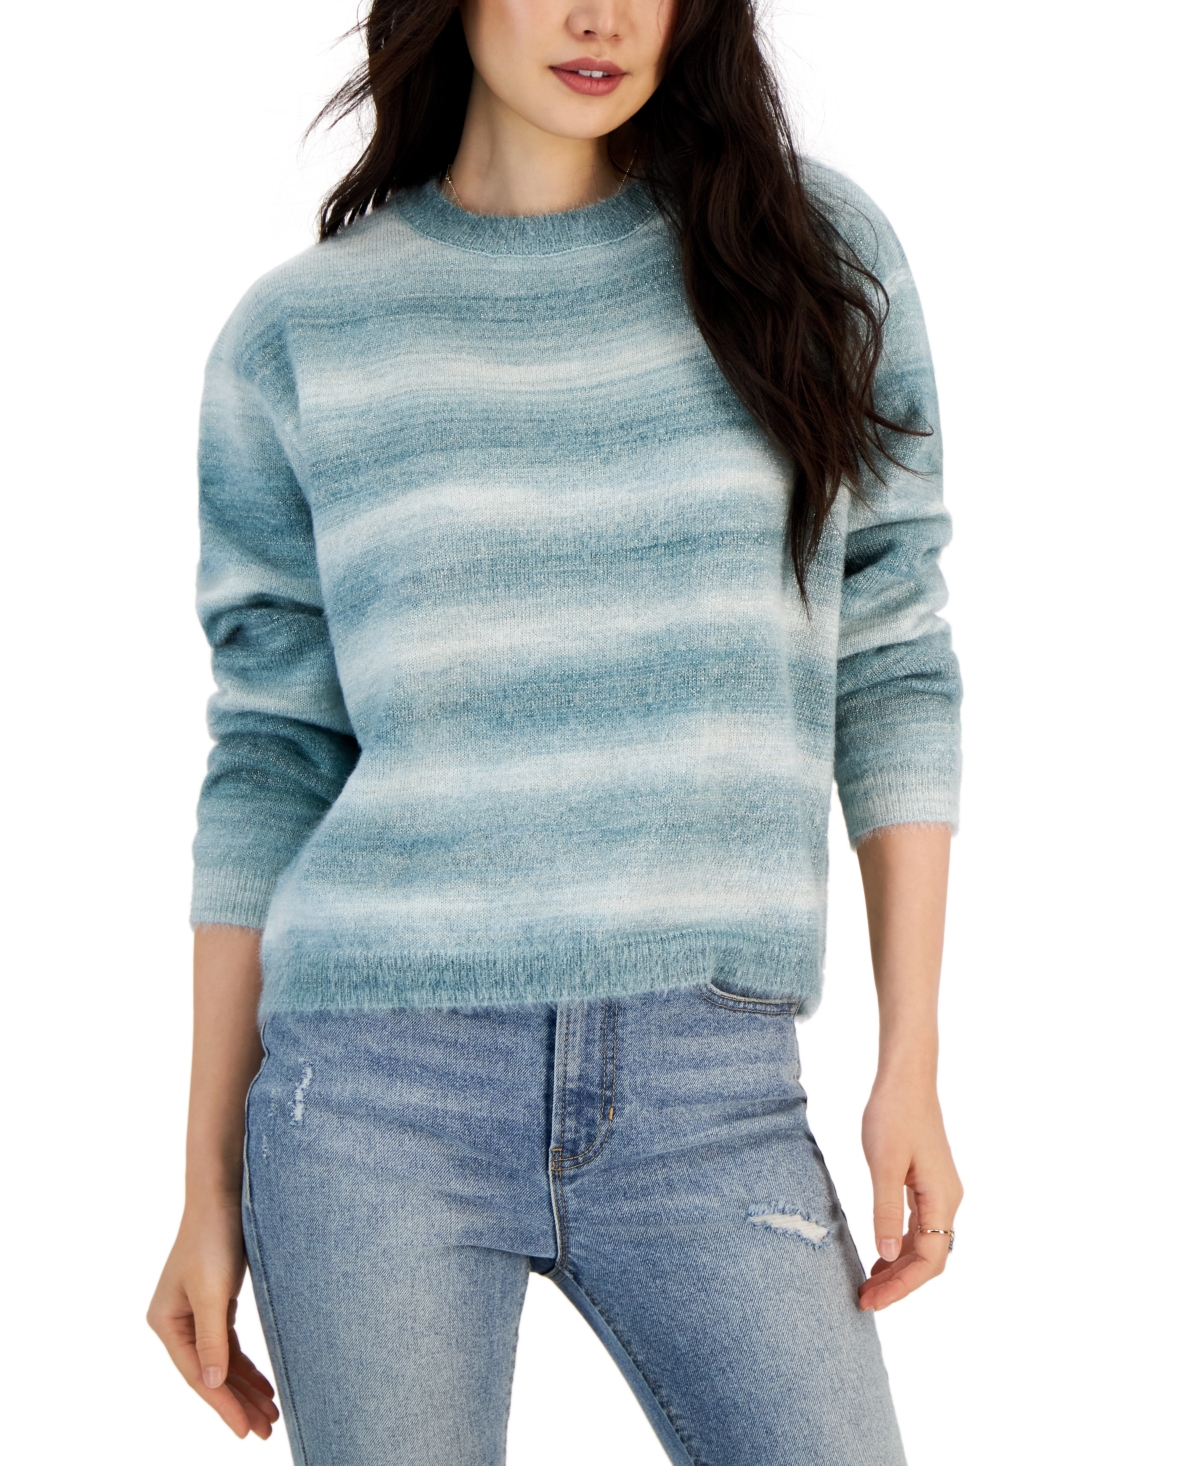 Juniors' Ombre Striped Metallic-Knit Sweater - Turquoise Gold Lurex